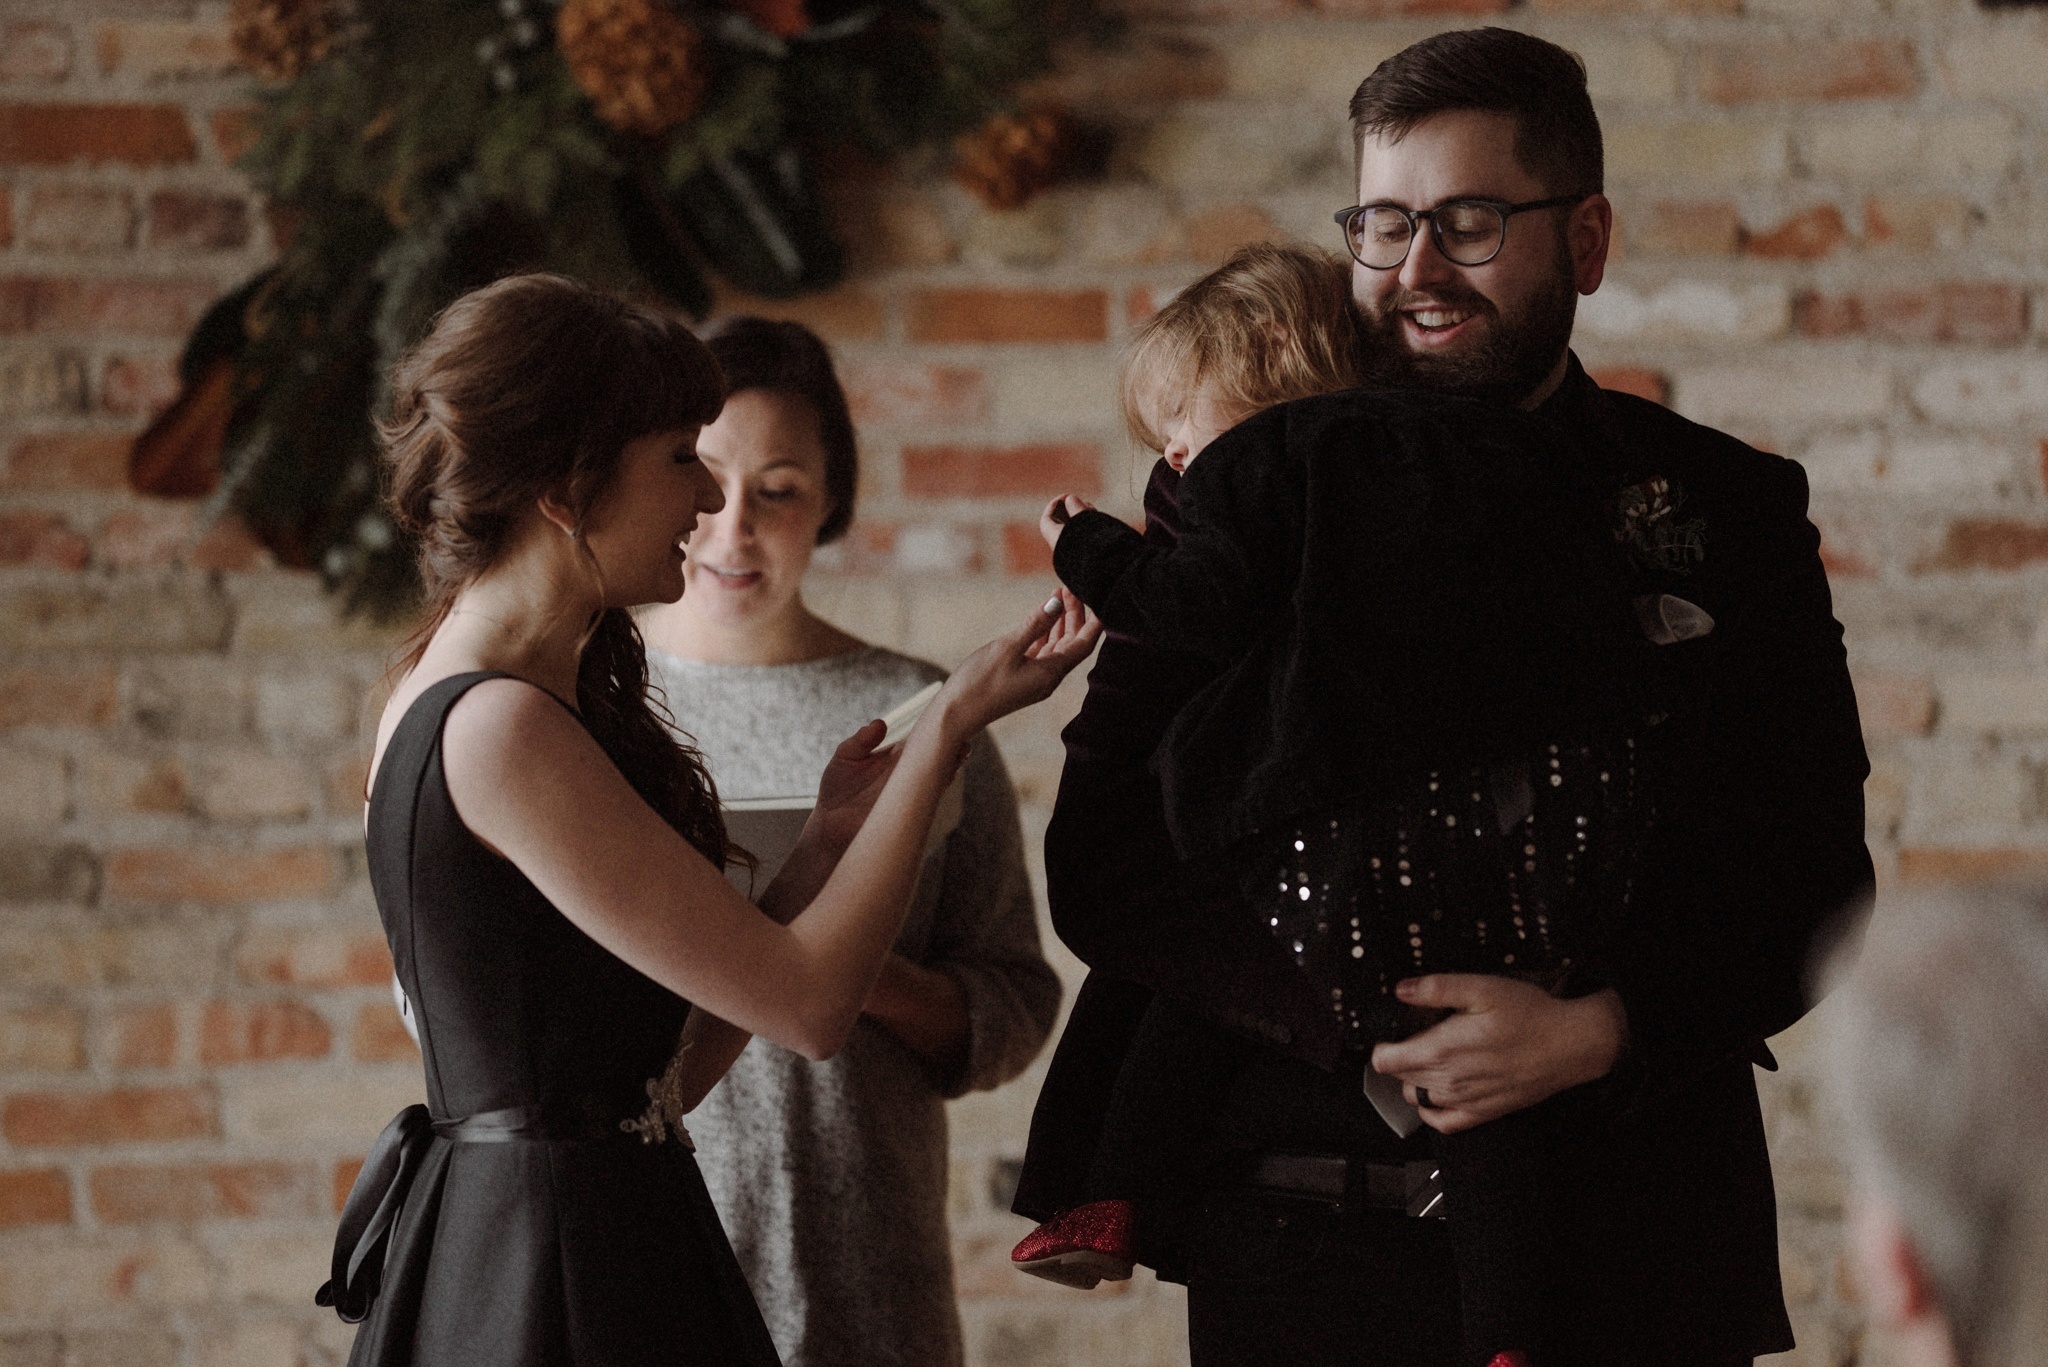 Winter solstice wedding, the Colagrossis and The Elopement Co.